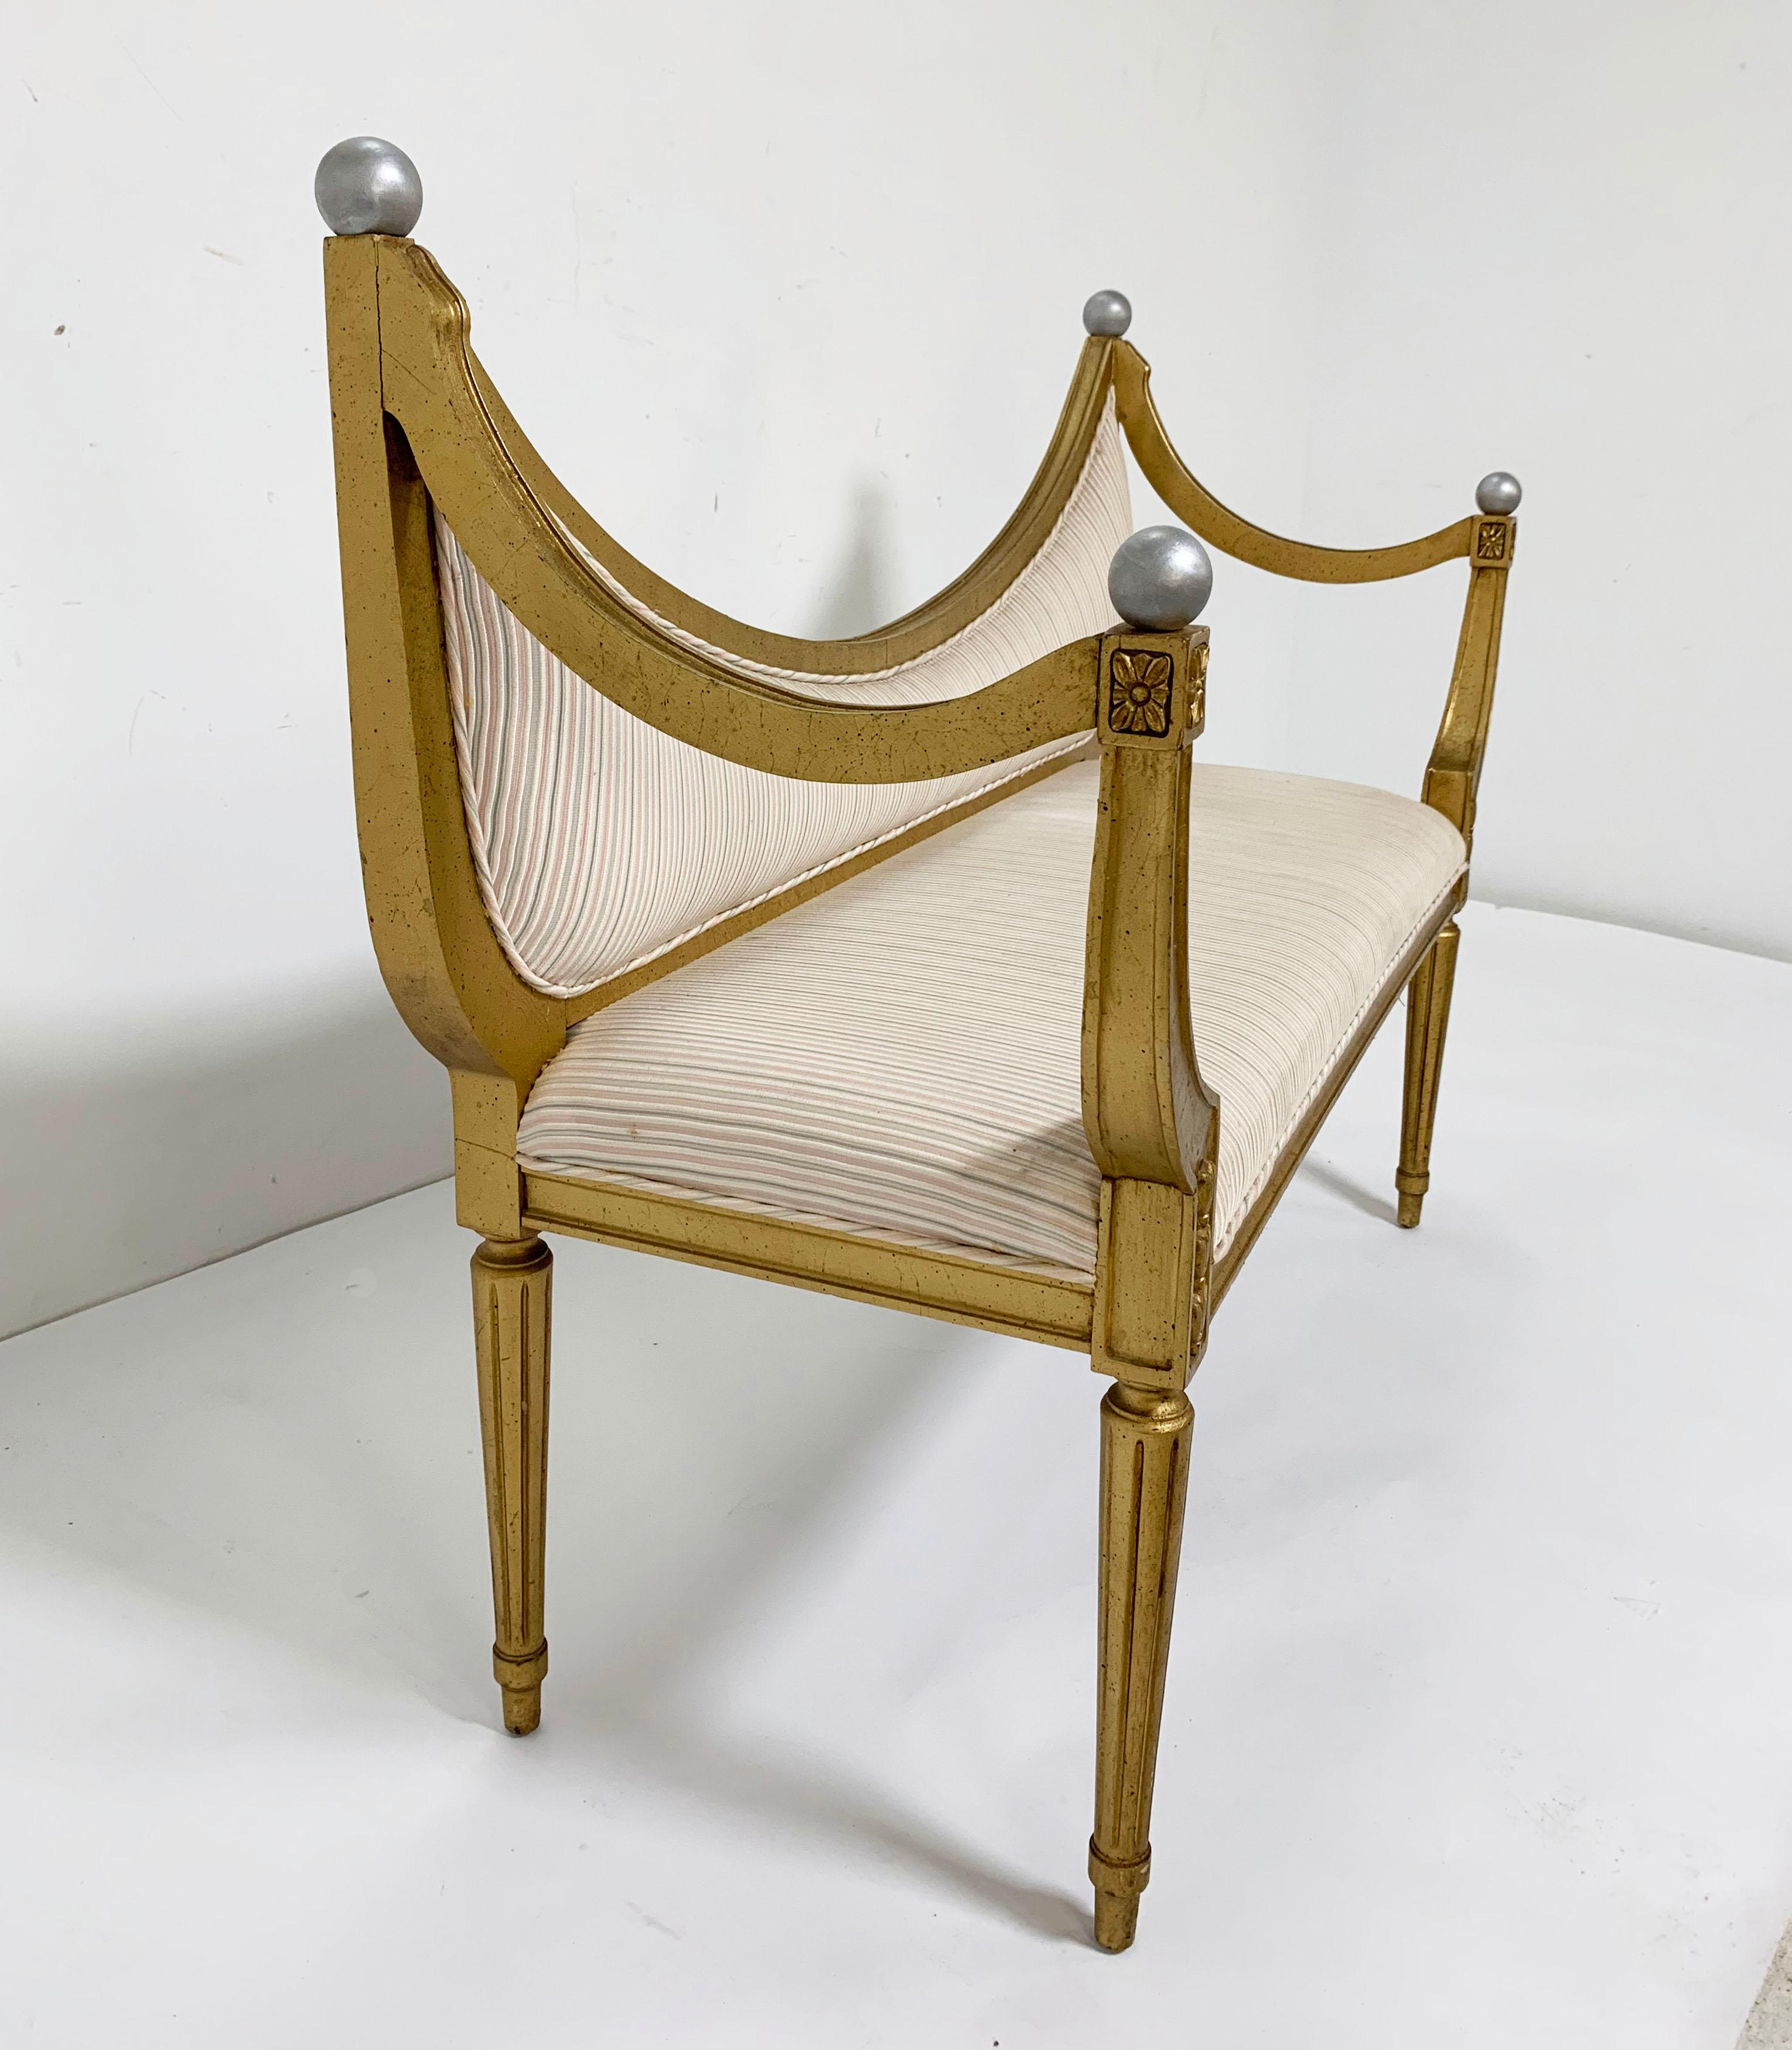 Upholstery Midcentury Giltwood Settee Bench in the Neoclassical Style, circa 1960s